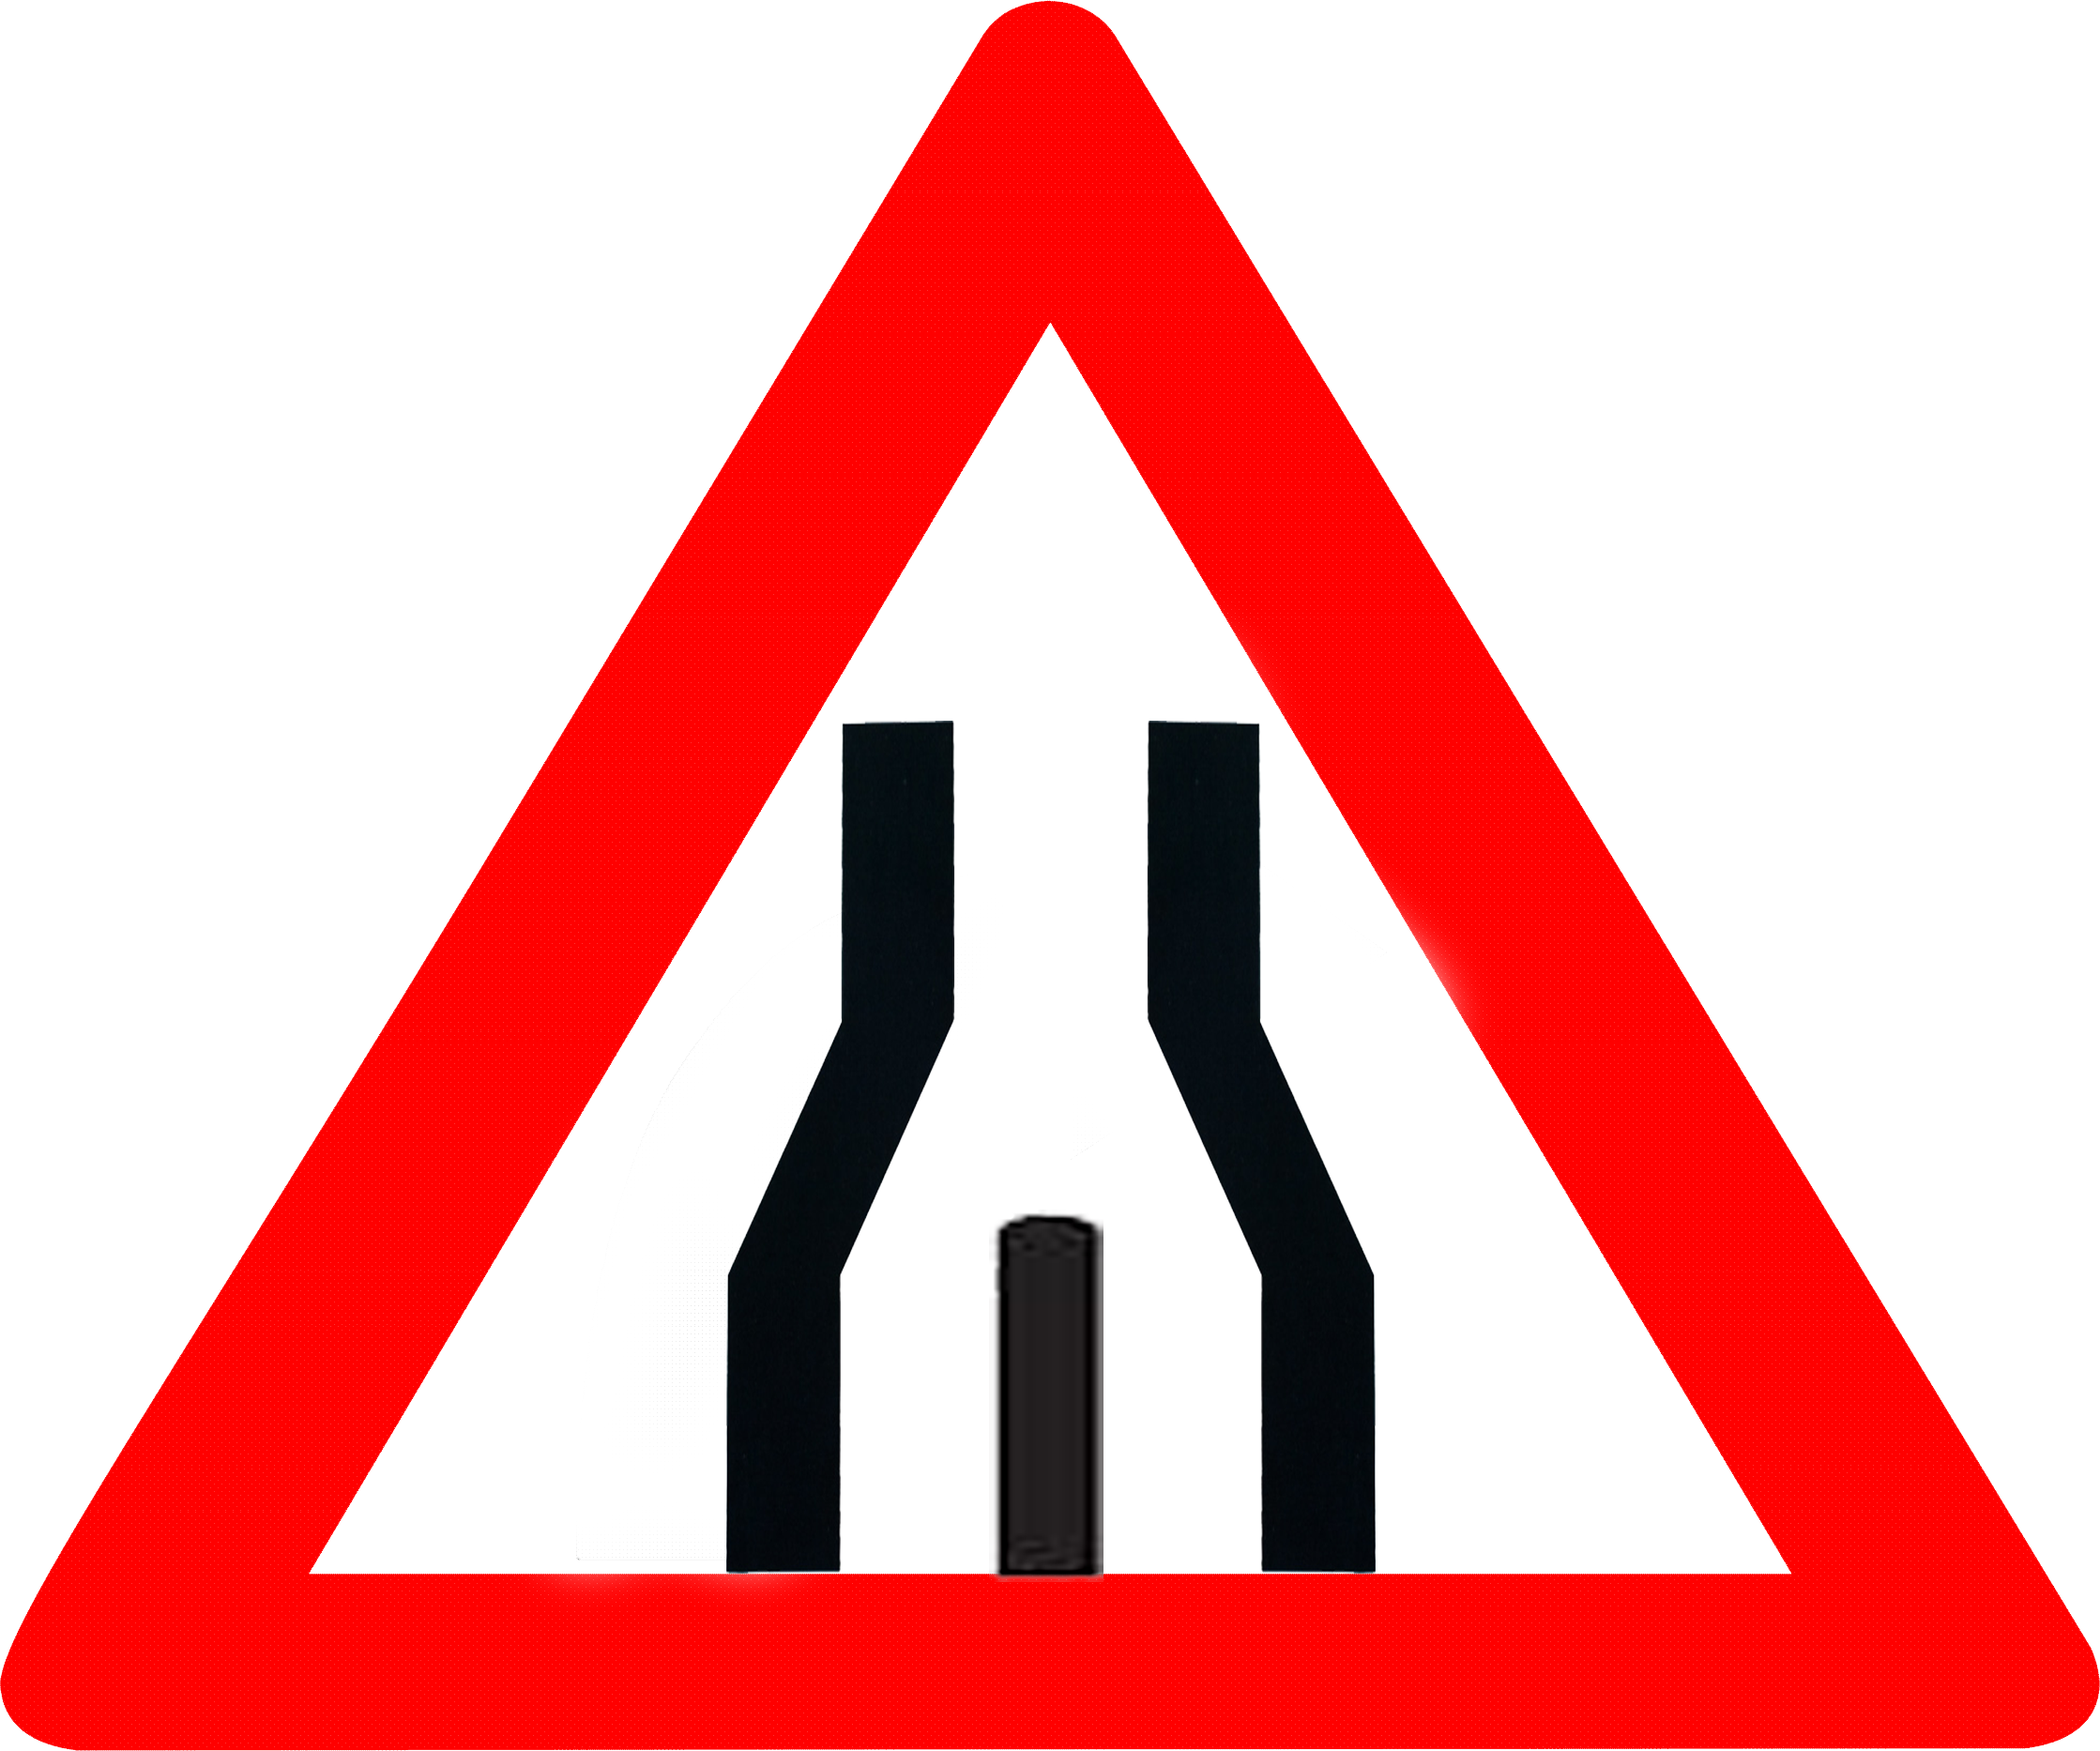 End Of Dual Carriageway - Traffic Sign (2238x1866)